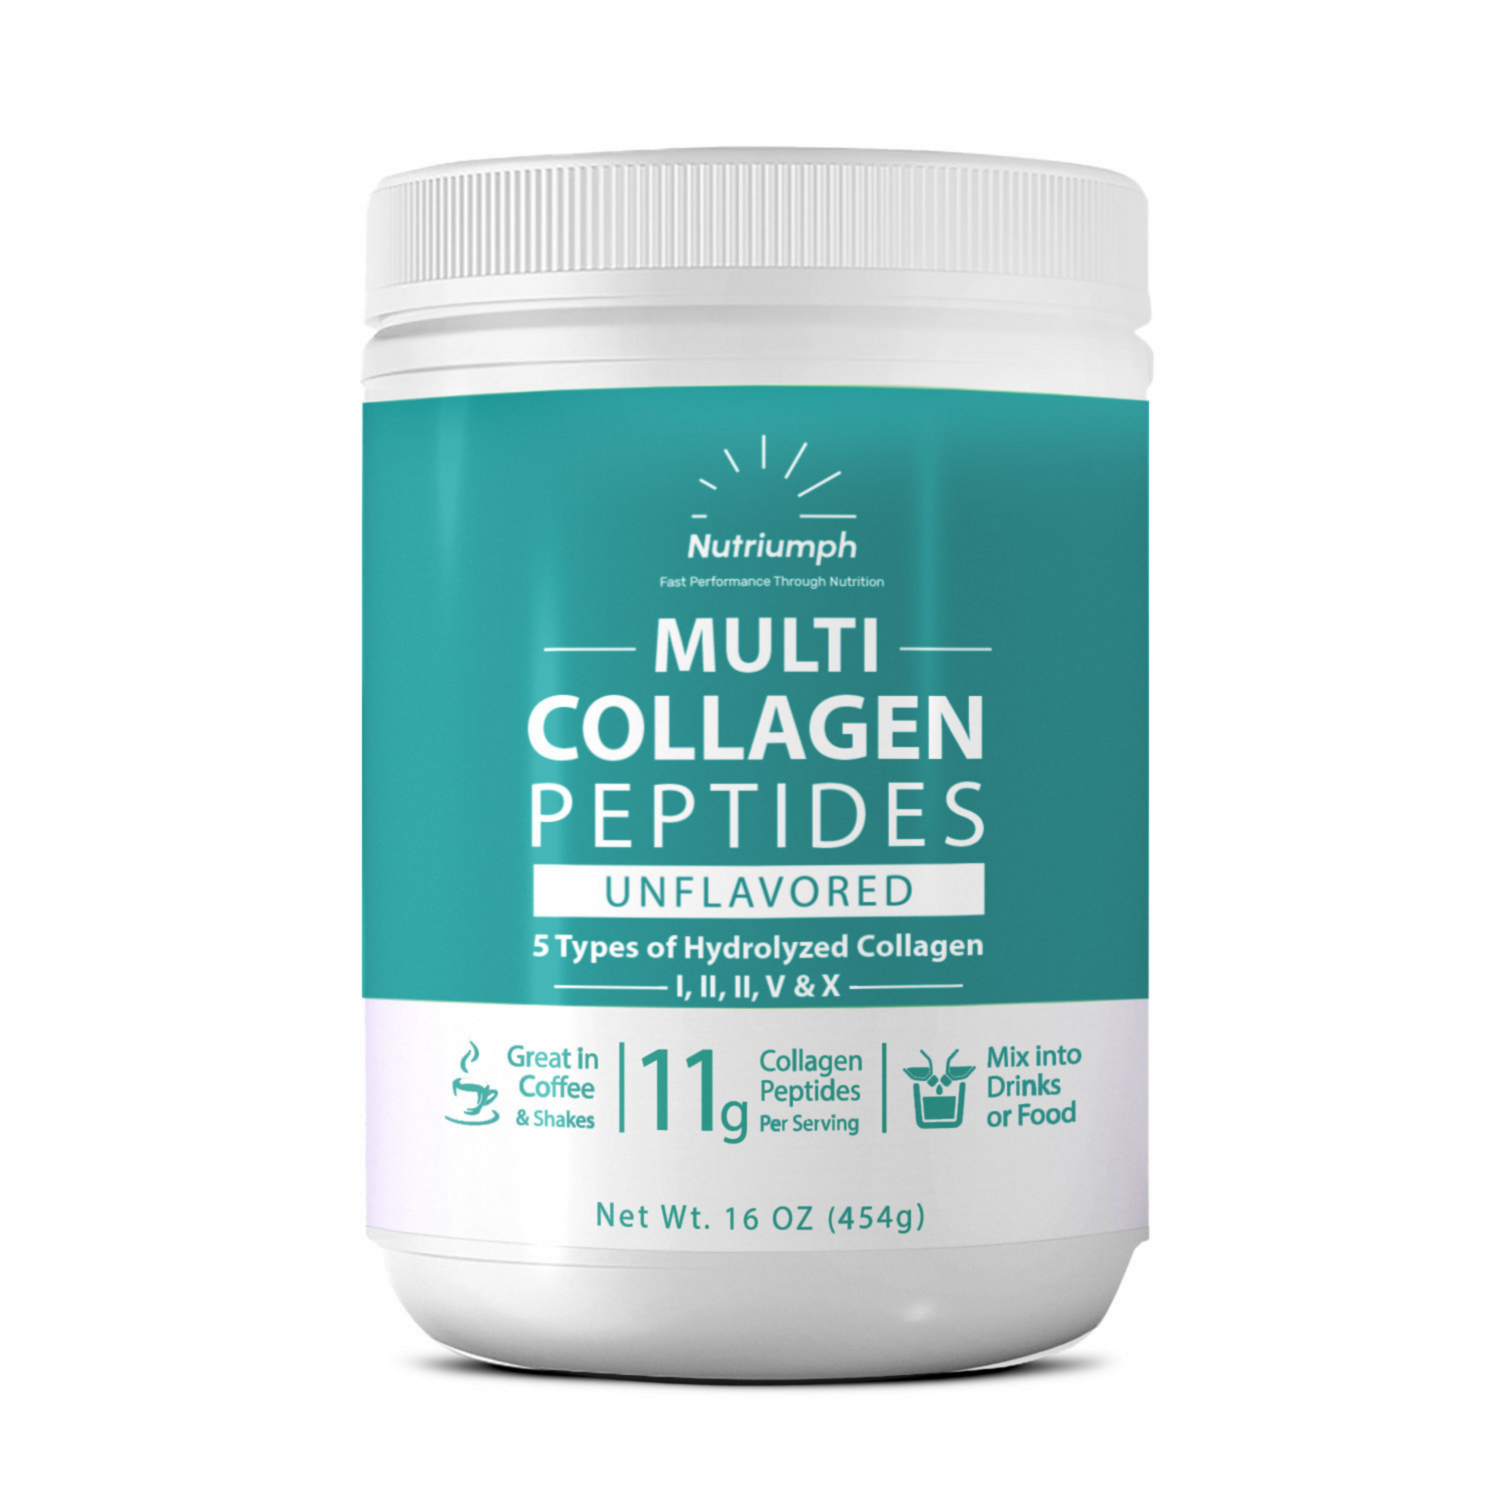 MULTI COLLAGEN PEPTIDES - 5 Types Hydrolyzed Powder, Unflavored